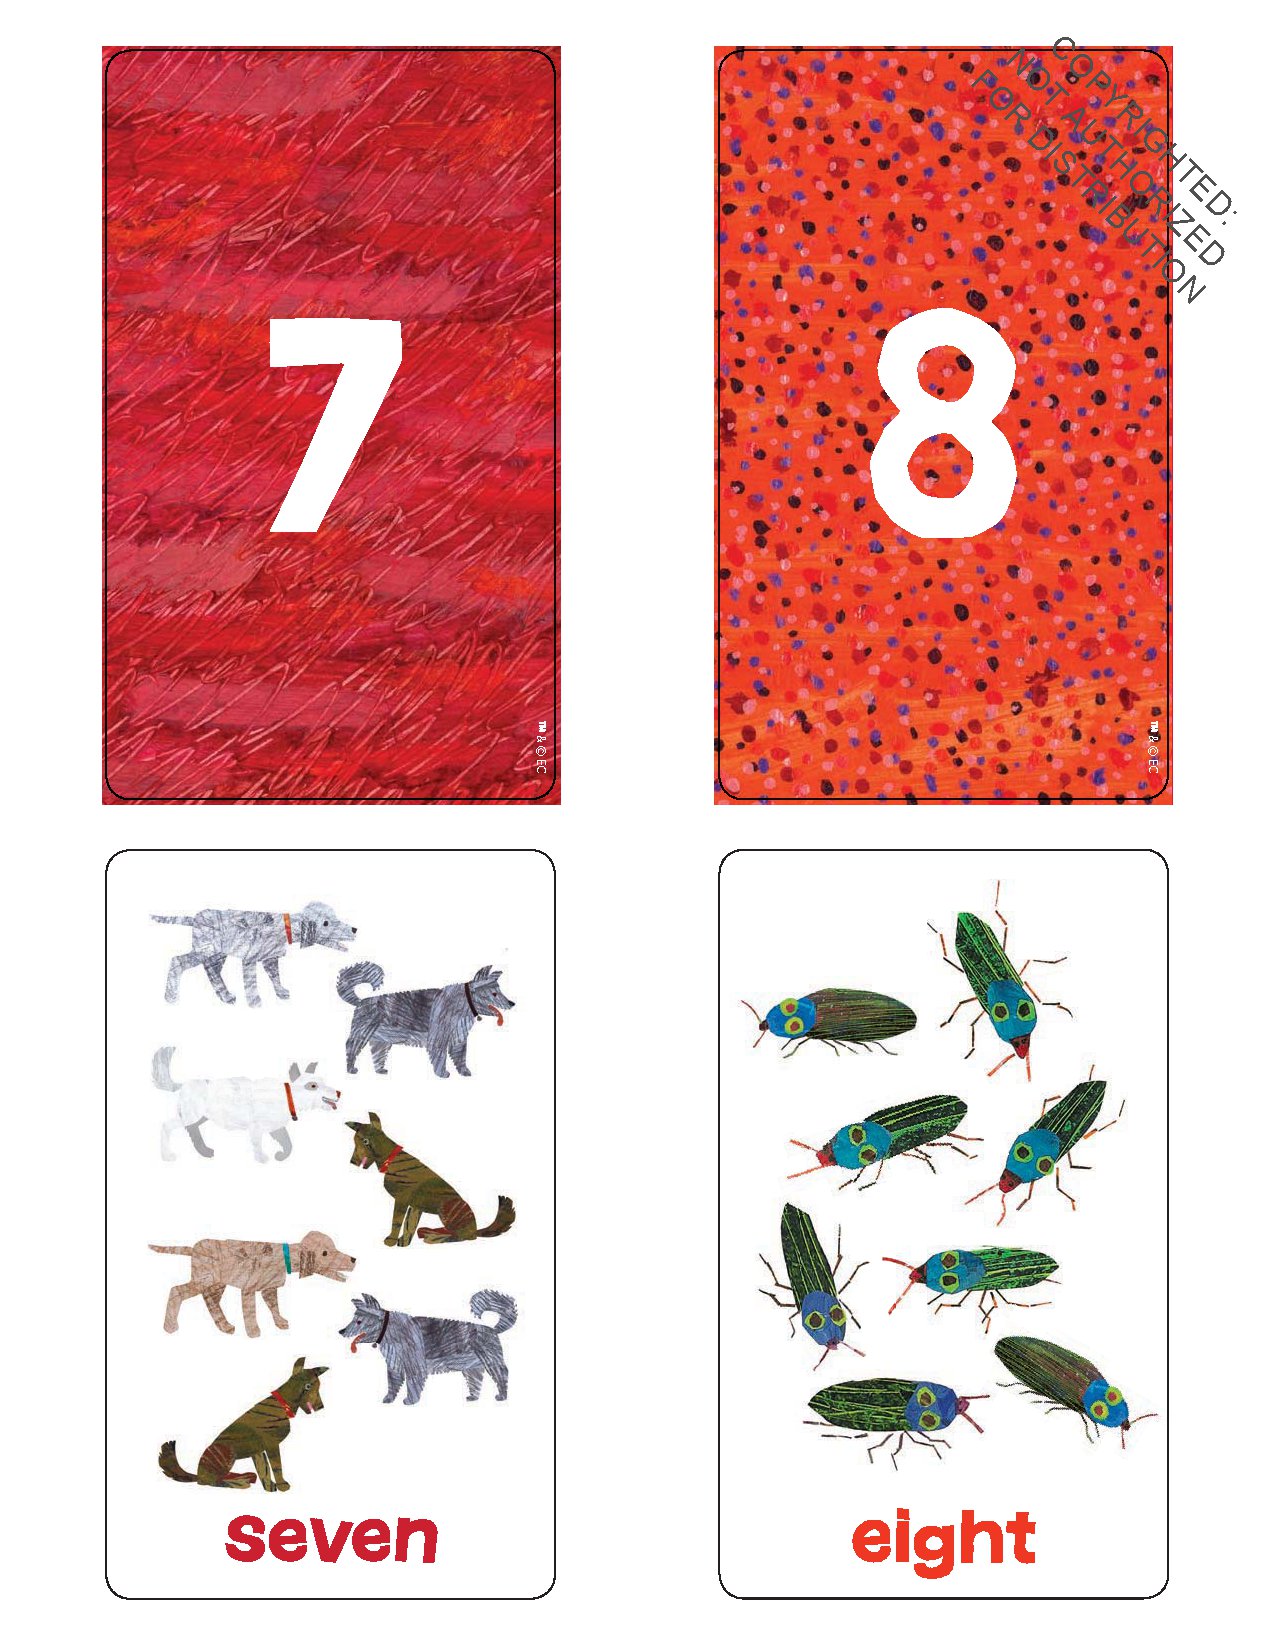 World of Eric Carle (TM) Numbers & Counting Flash Cards